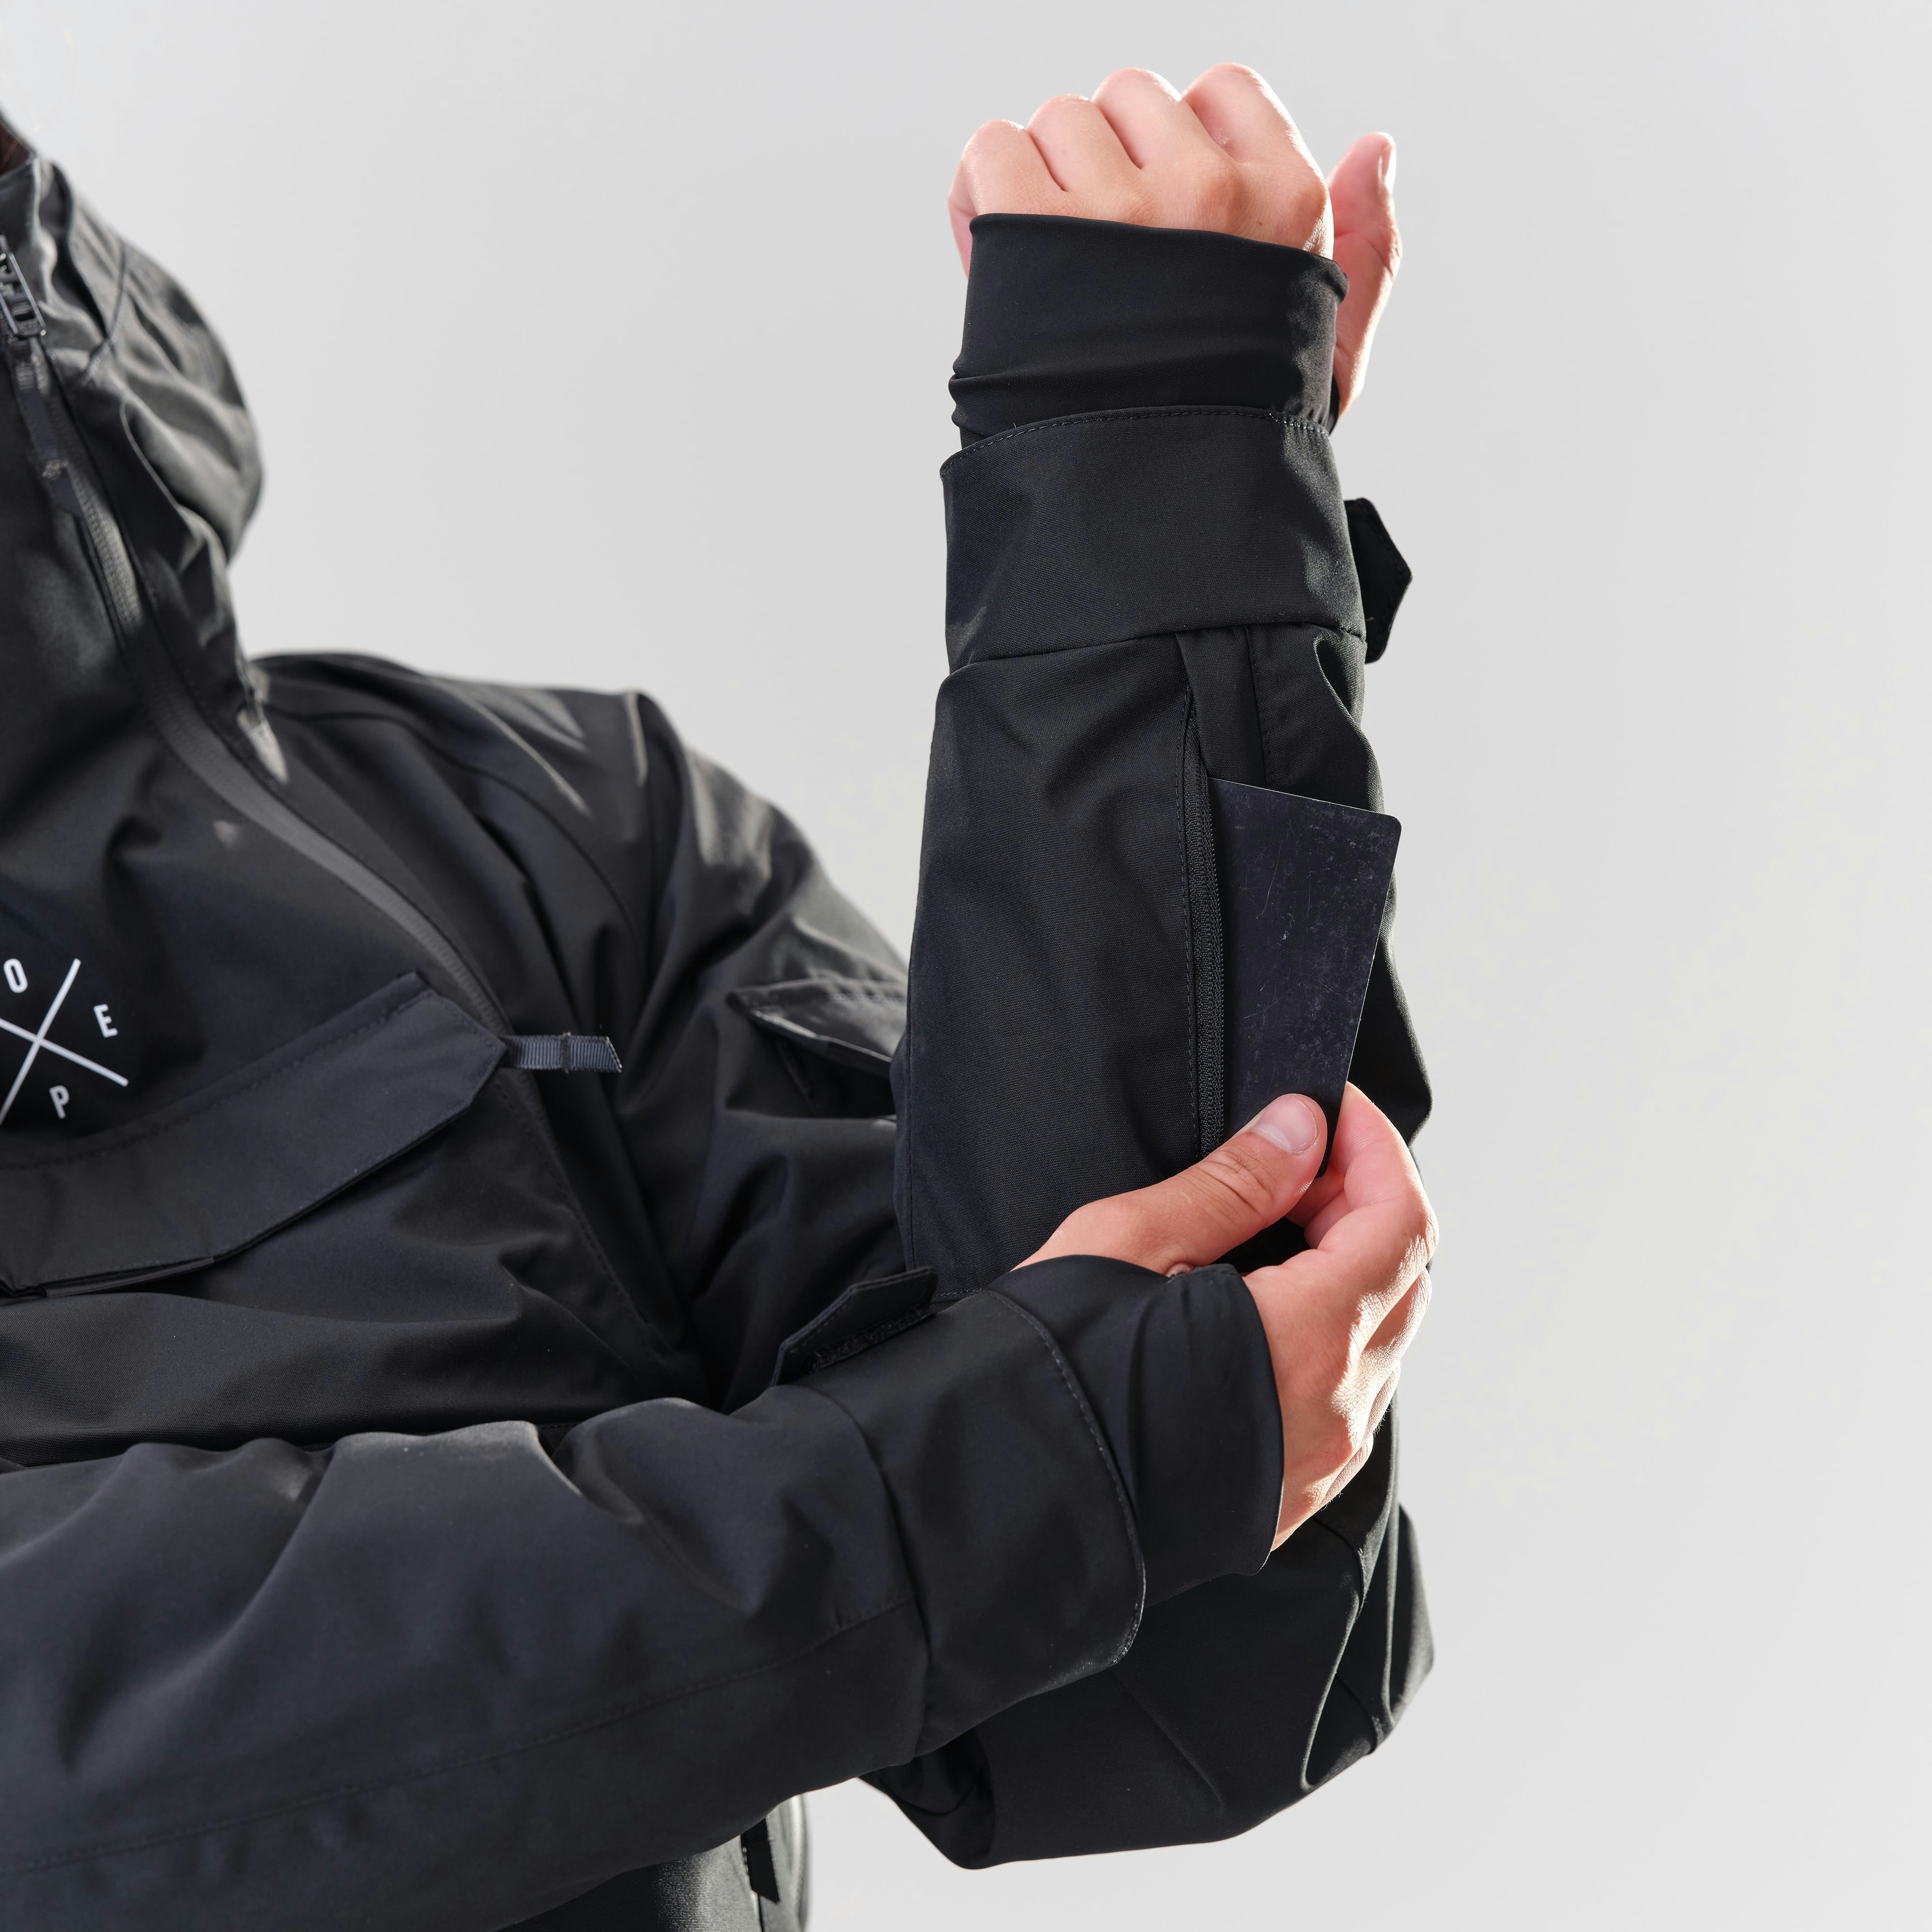 How To Get The Most From Your New Snow Jacket